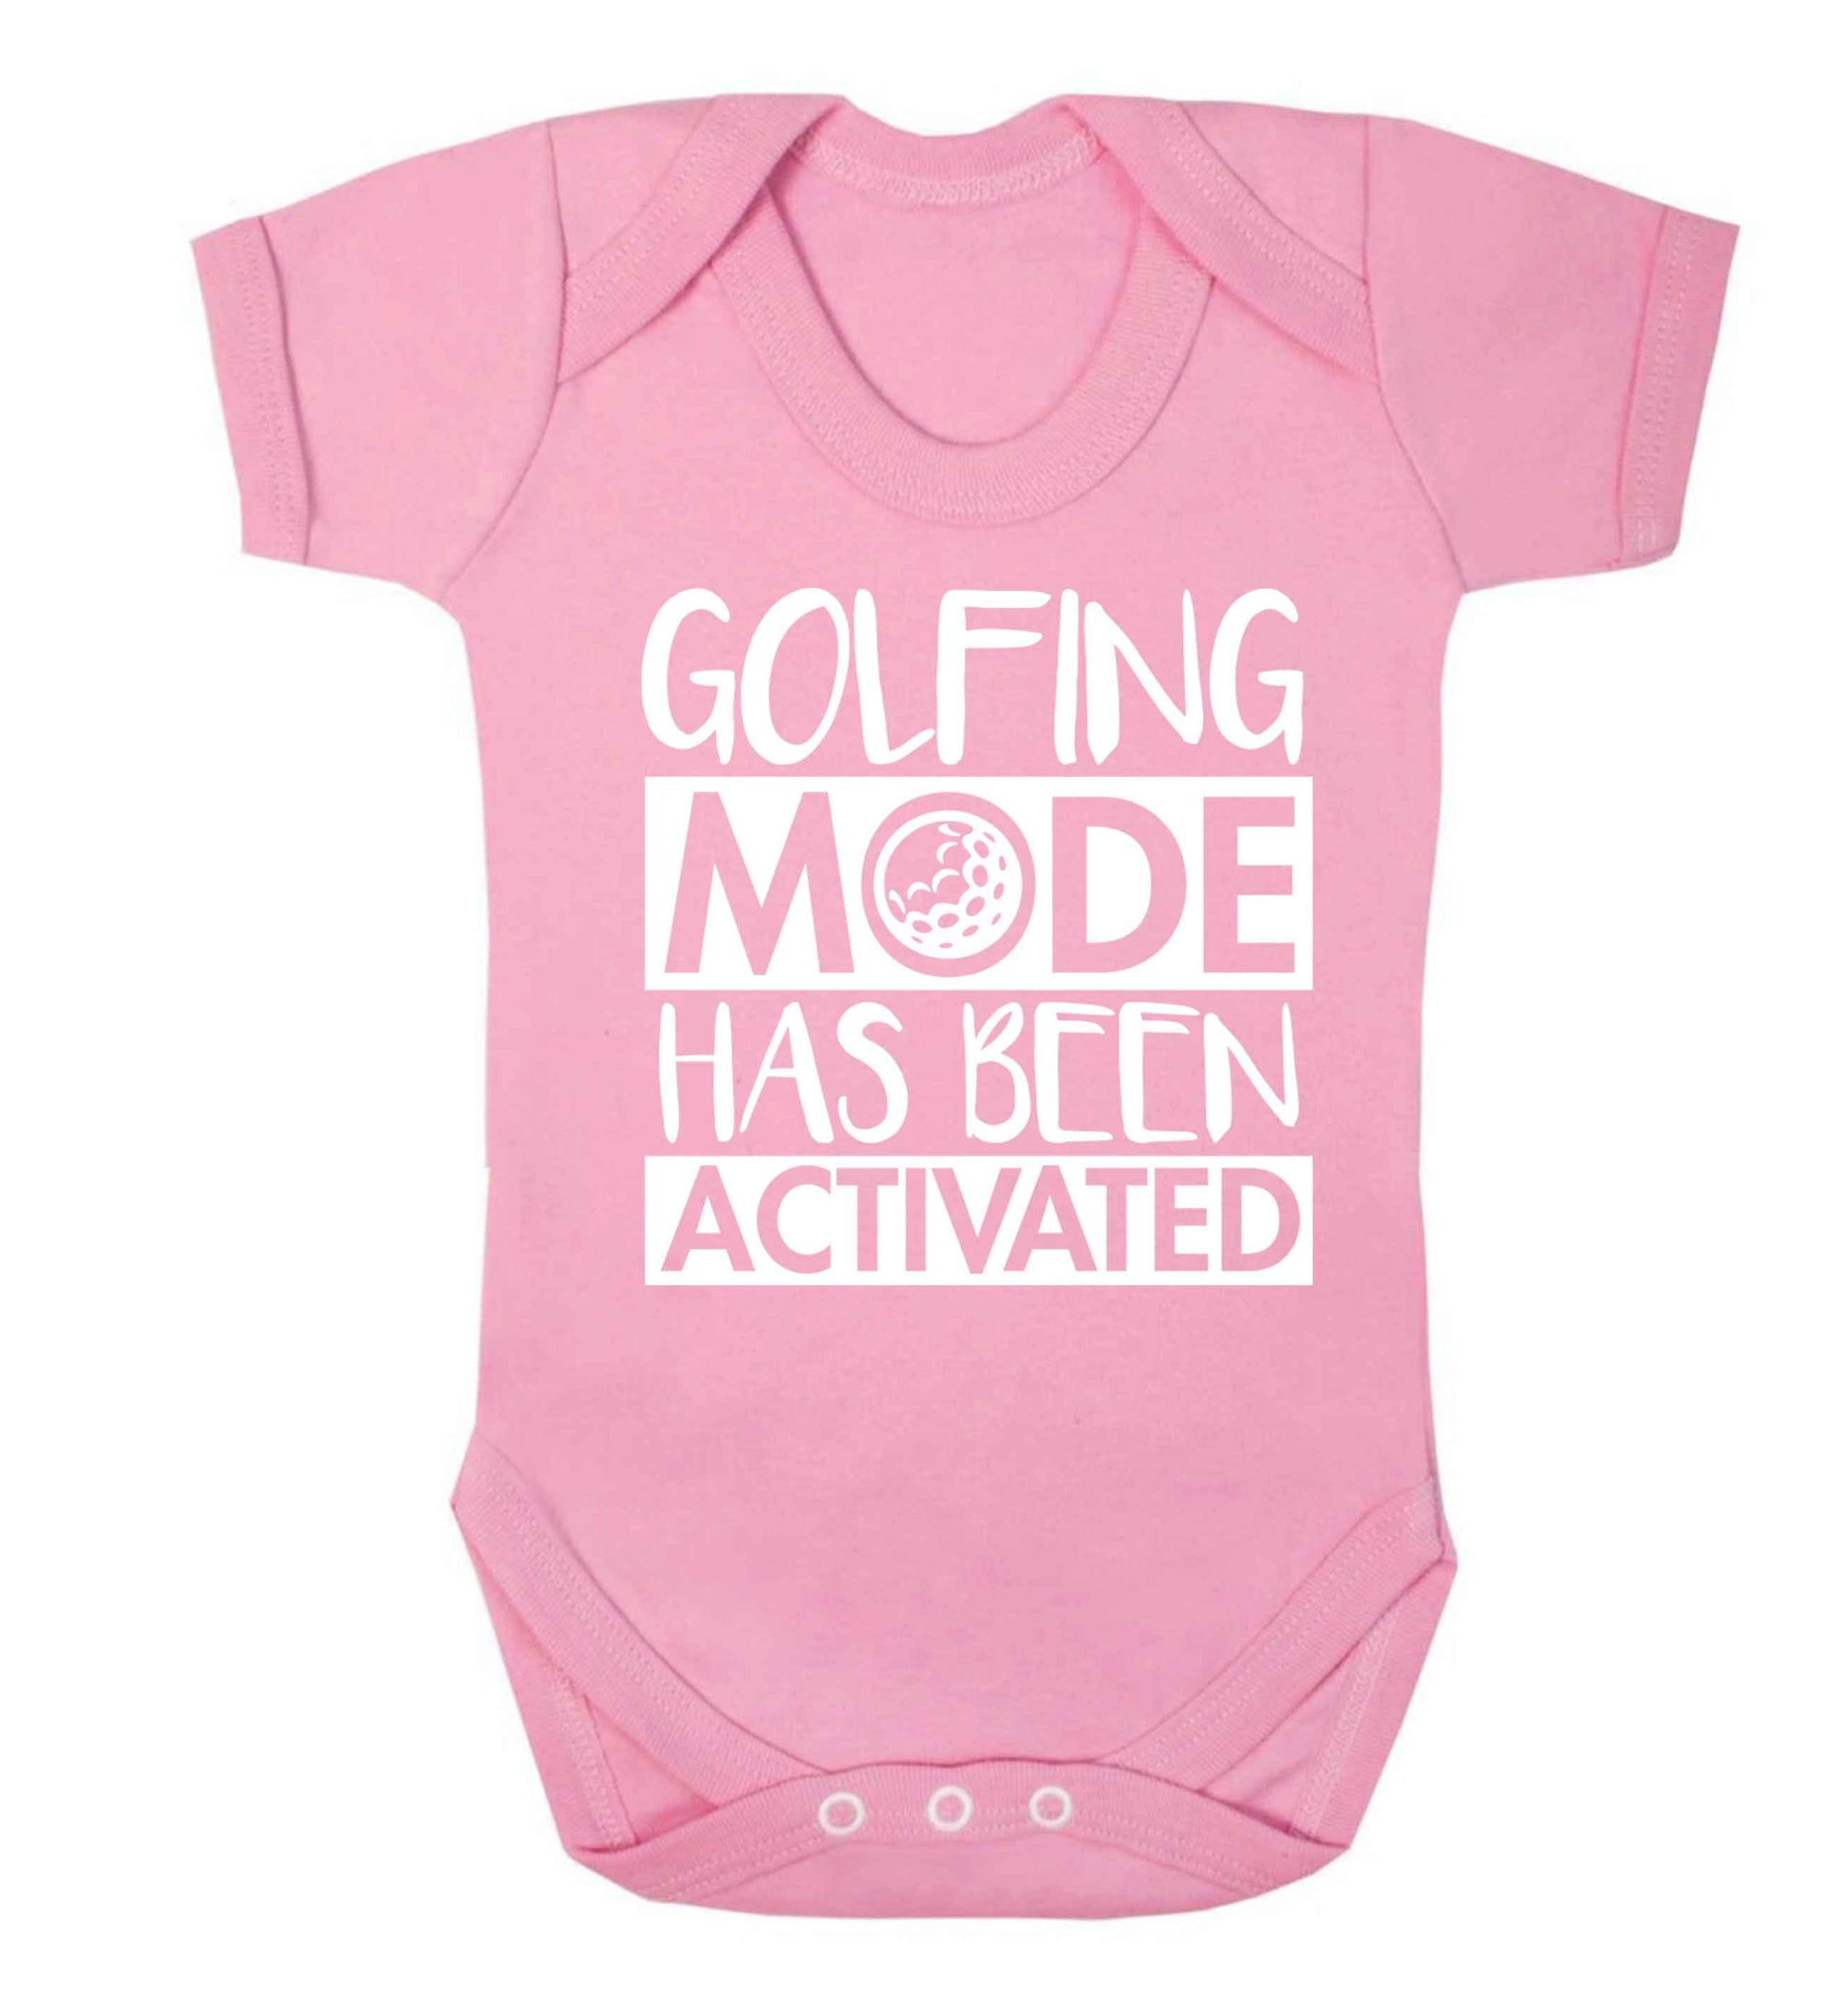 Golfing mode has been activated Baby Vest pale pink 18-24 months